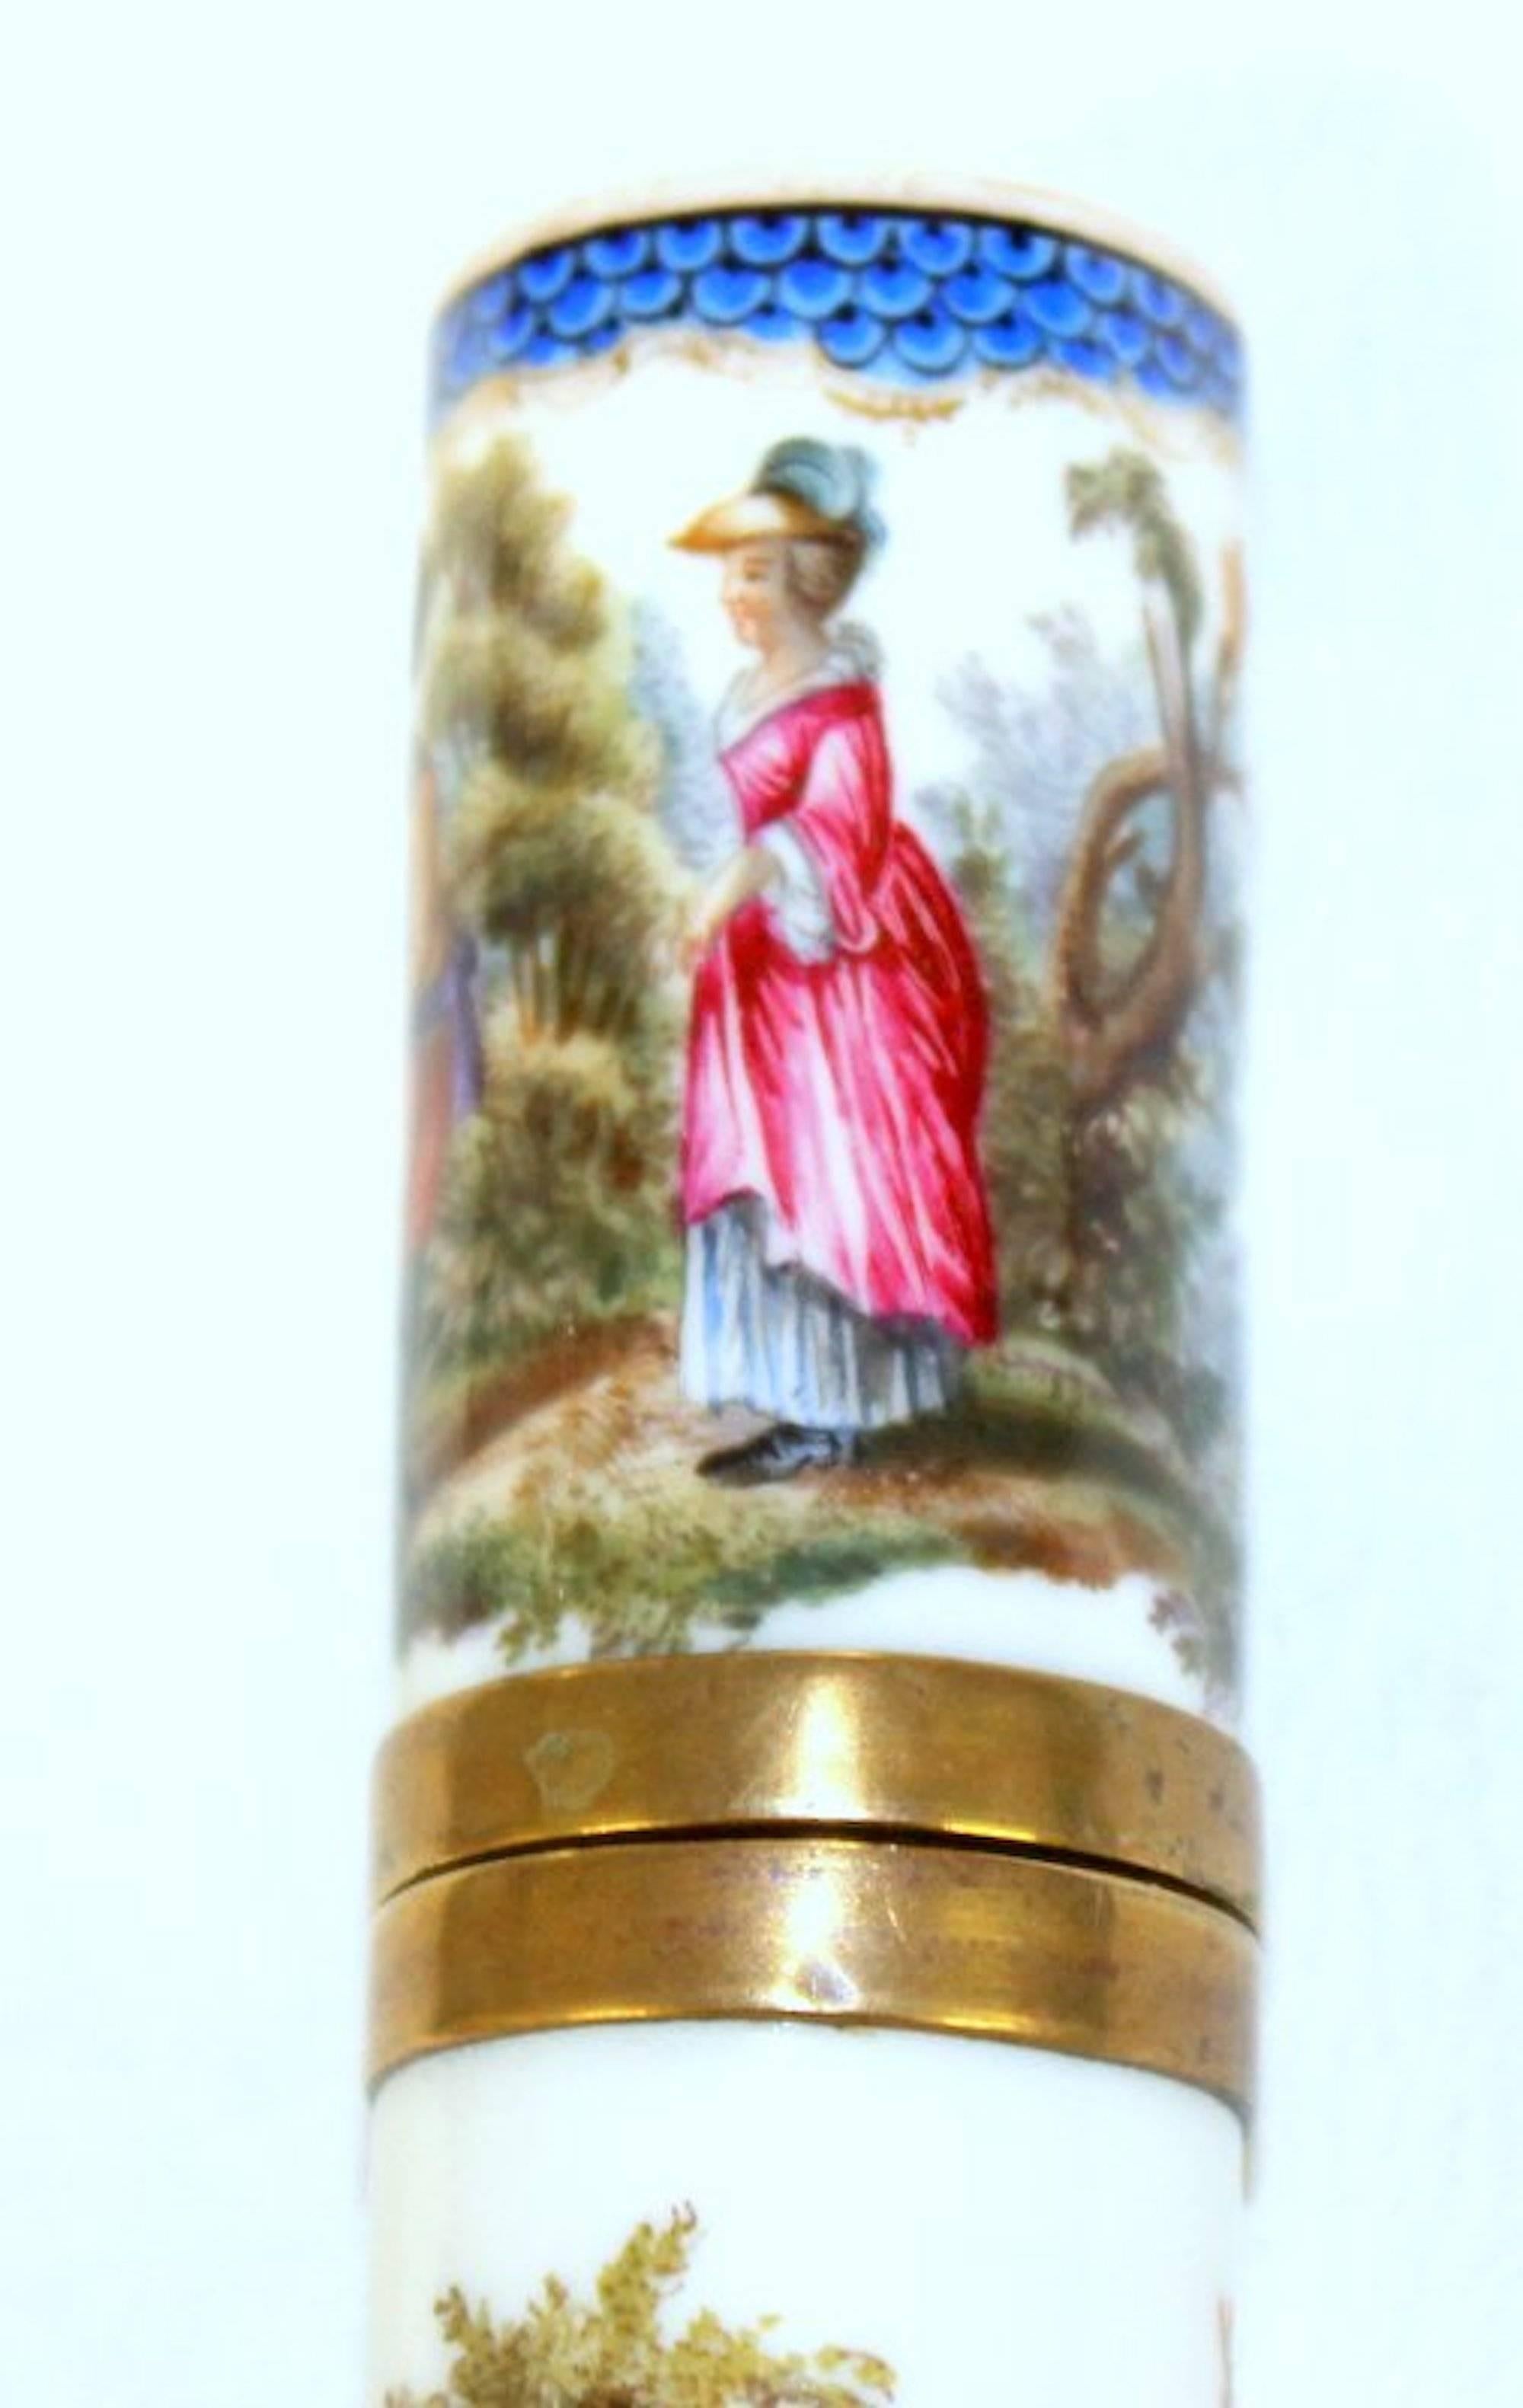 Antique English hand-painted porcelain bodkin or billet-doux case, exceptionally hand-painted in a neoclassical style.

Please note damaged lid/top broken and mended many years ago. Glass insert chipped. Bodkin- needle case, billet doux for love